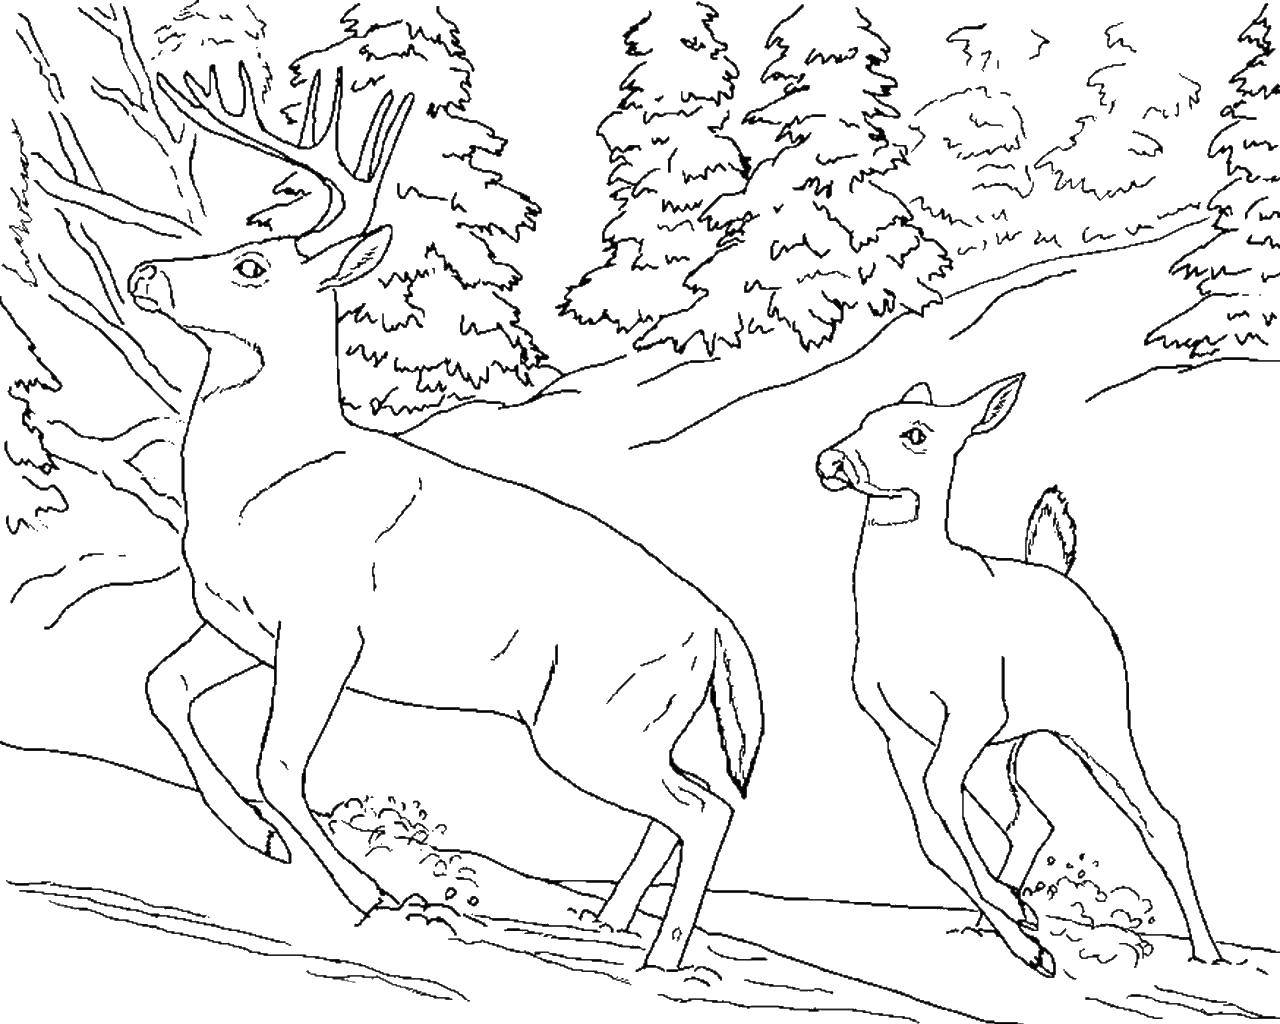 Coloring Deer in the mountains. Category Animals. Tags:  animals, deer, winter, snow, mountains.